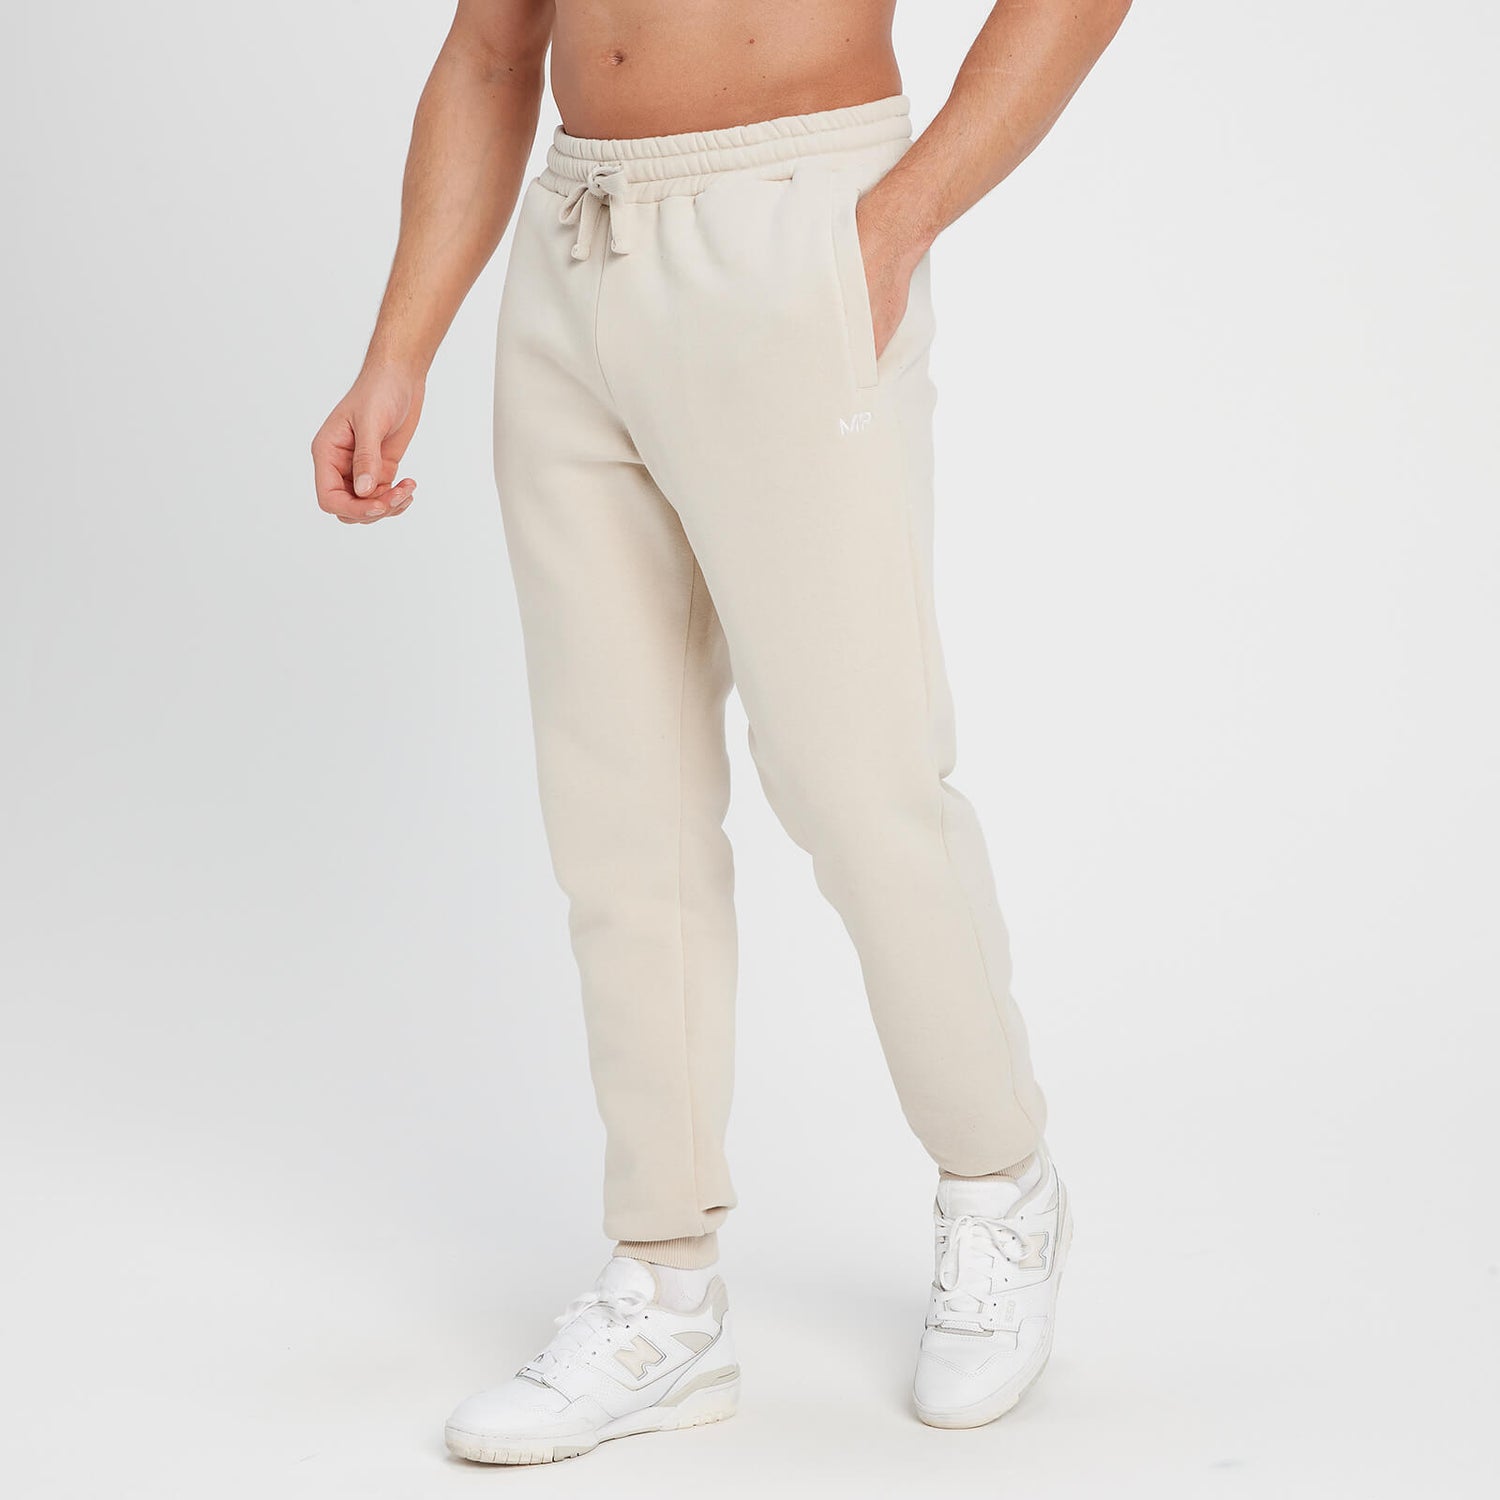 MP Men's Rest Day Joggers - Sand - XL